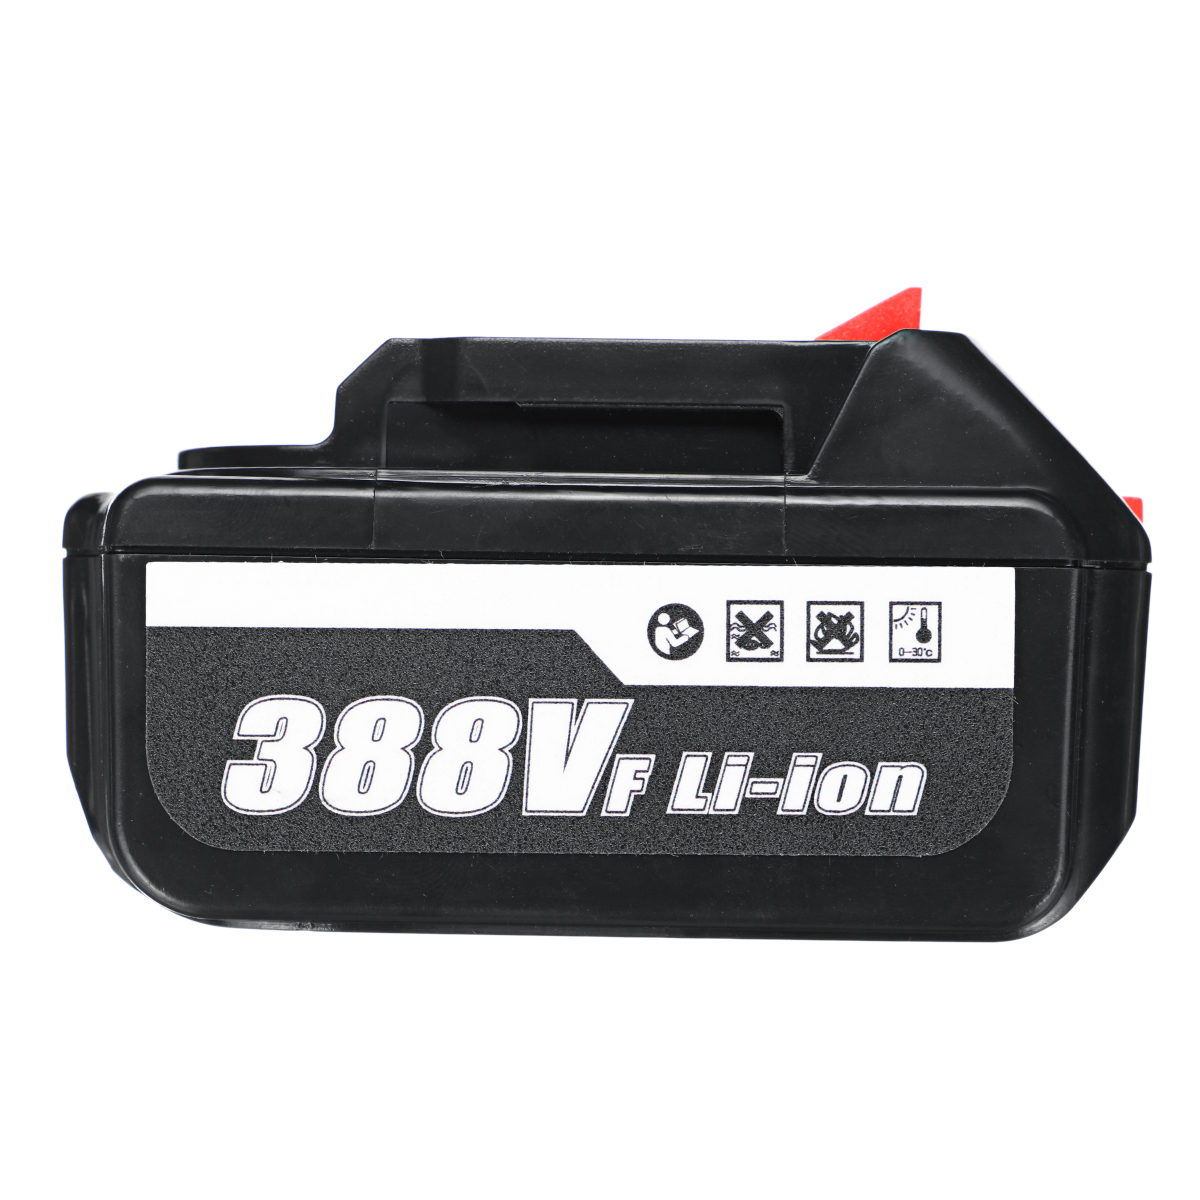 Find 388v 18650 10000mAh Lithium ion Battery For Tools Angle Grinder Electromechanical Drill for Sale on Gipsybee.com with cryptocurrencies